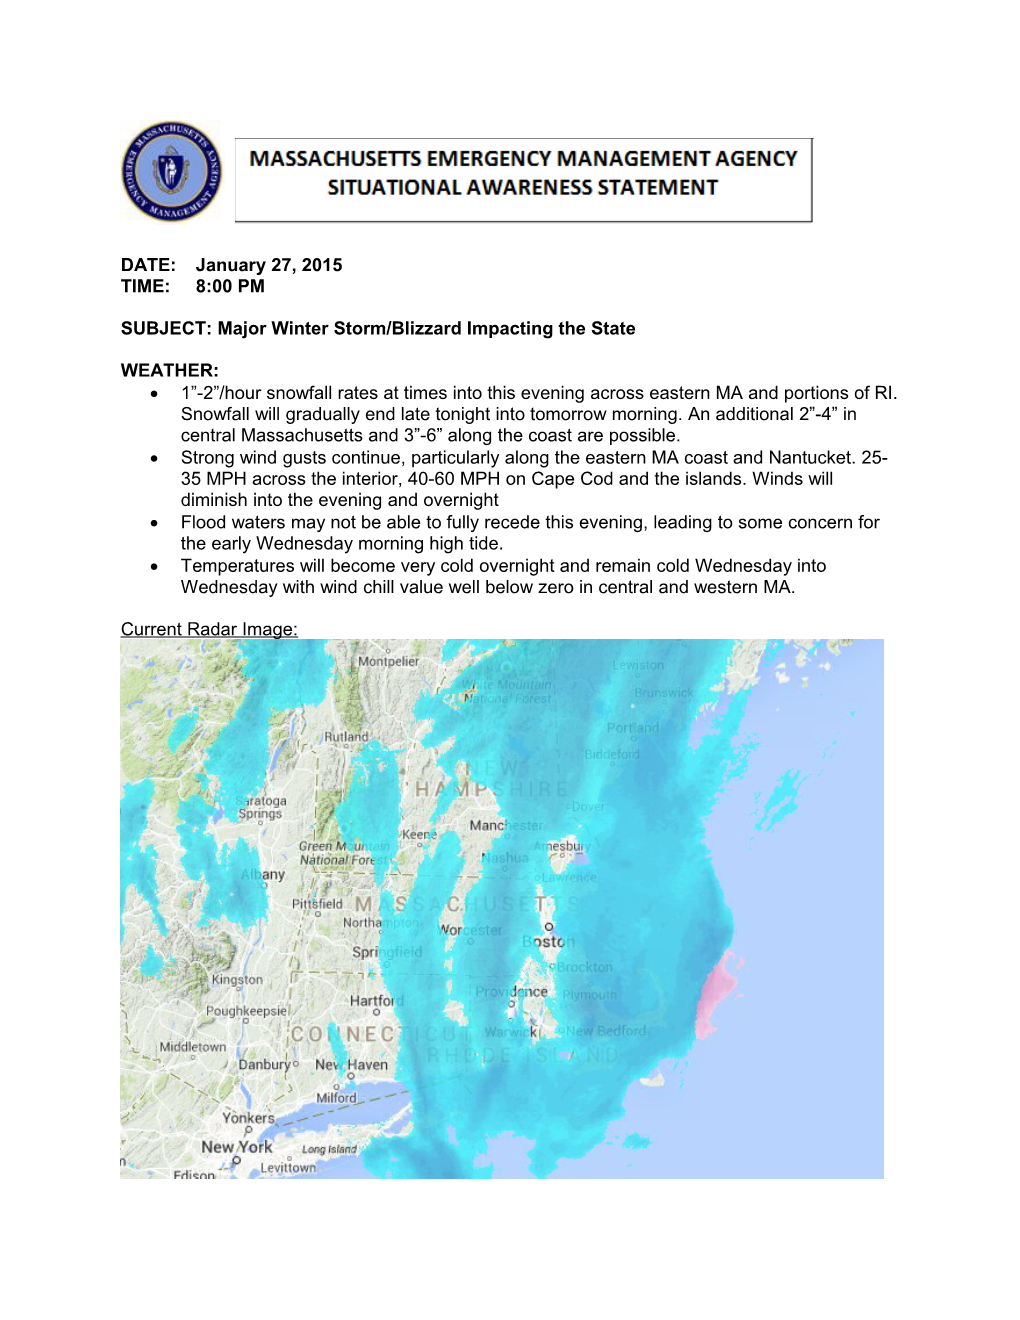 SUBJECT: Major Winter Storm/Blizzard Impacting the State